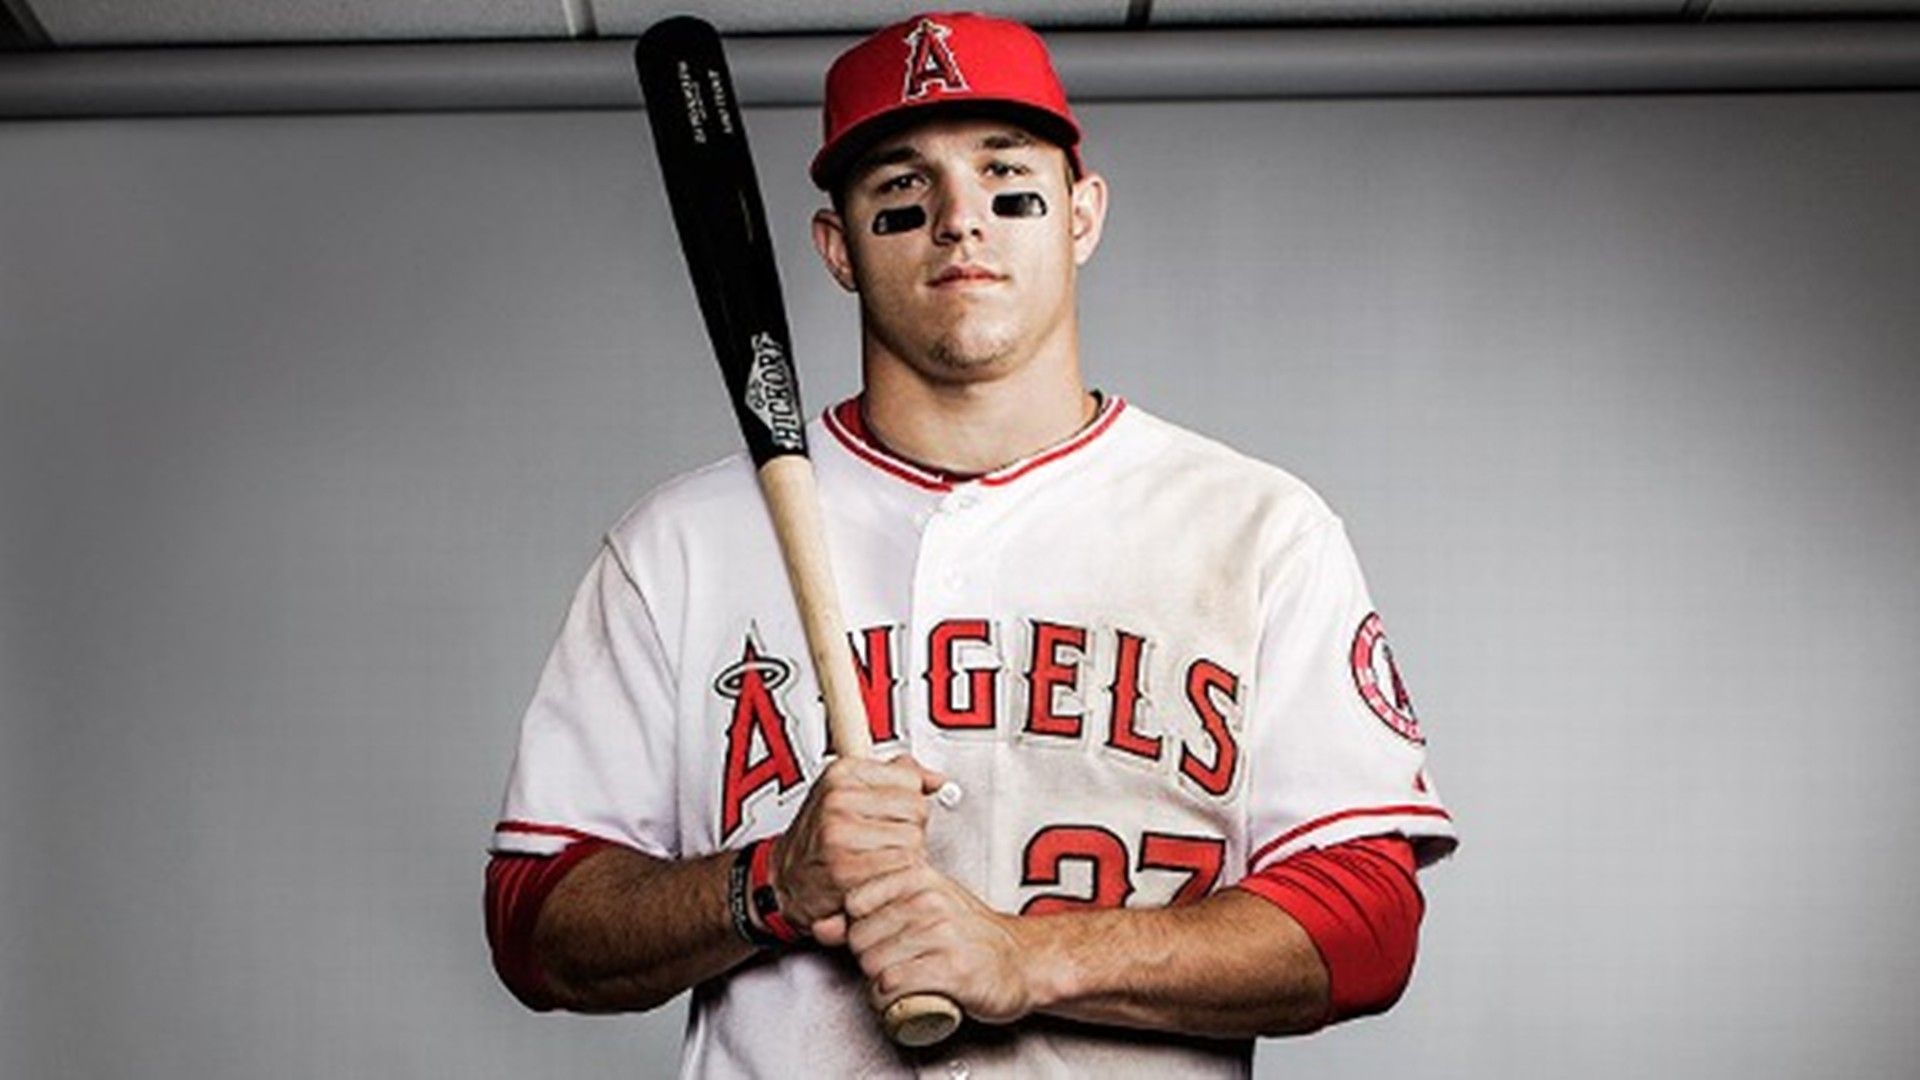 Mike Trout Wallpaper by NewtDesigns on DeviantArt